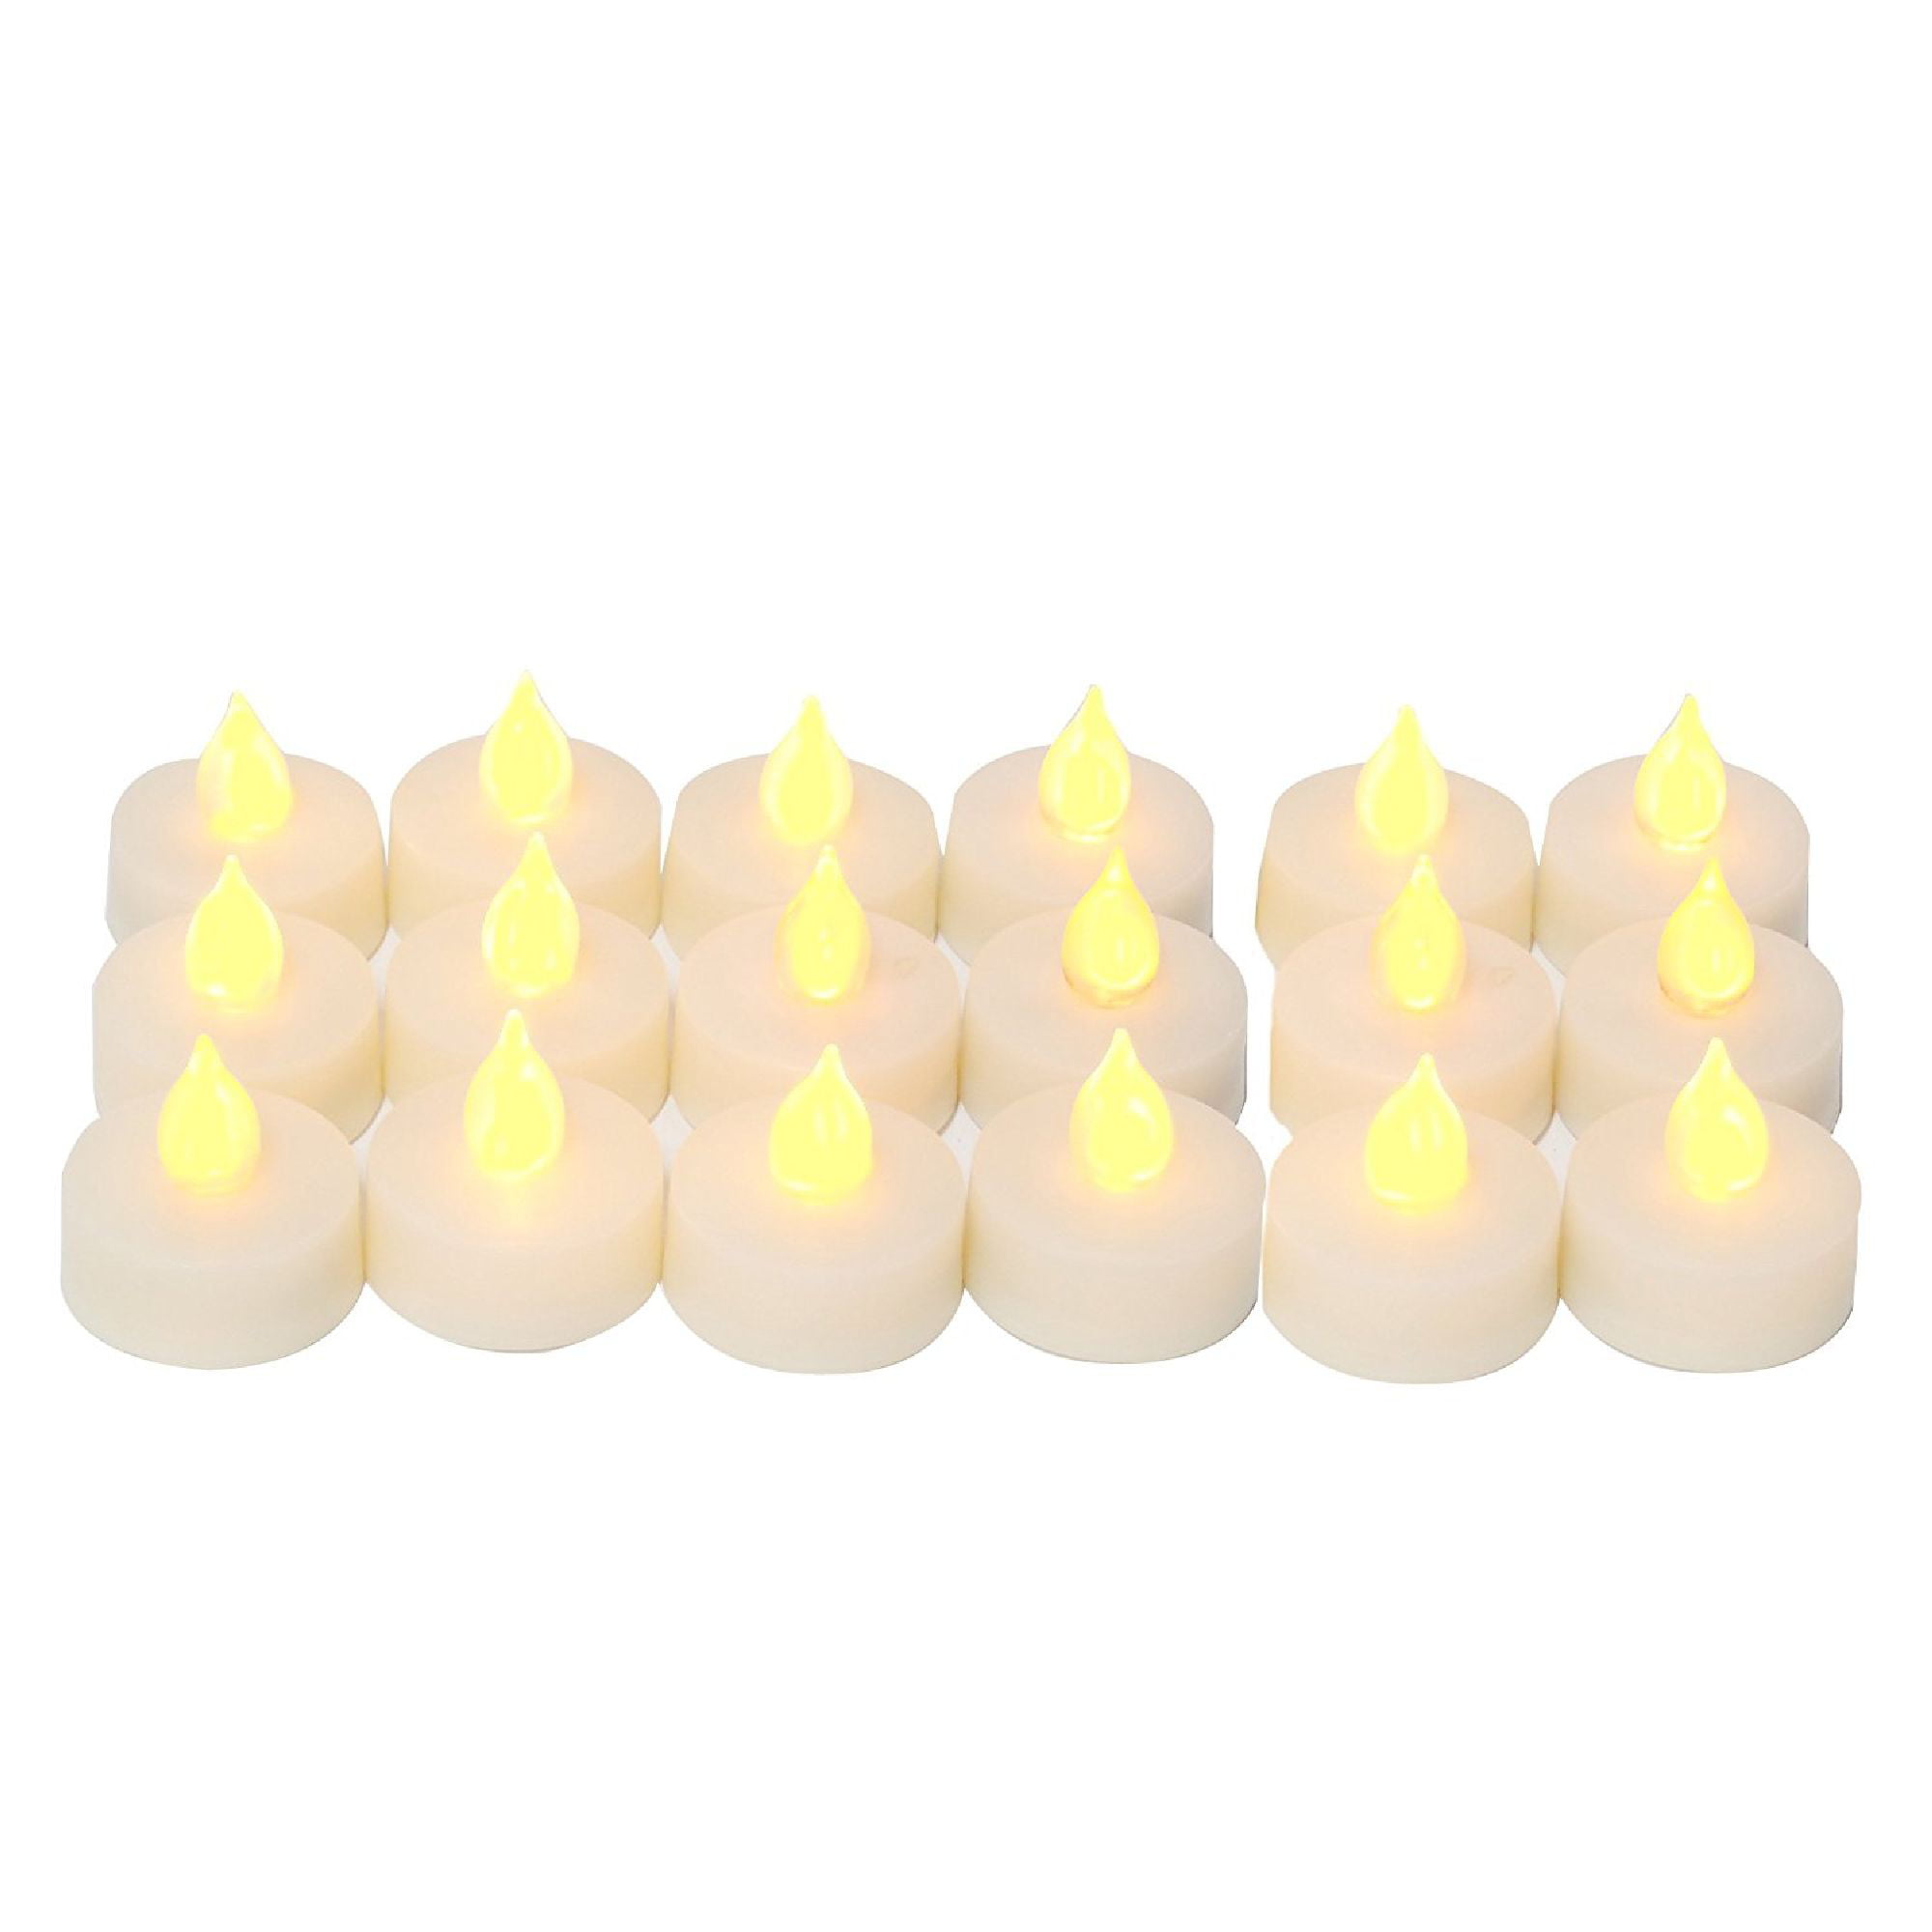 18pc Battery Operated Flickering PINK LED Tealights Votive Tea Lights Flameless 